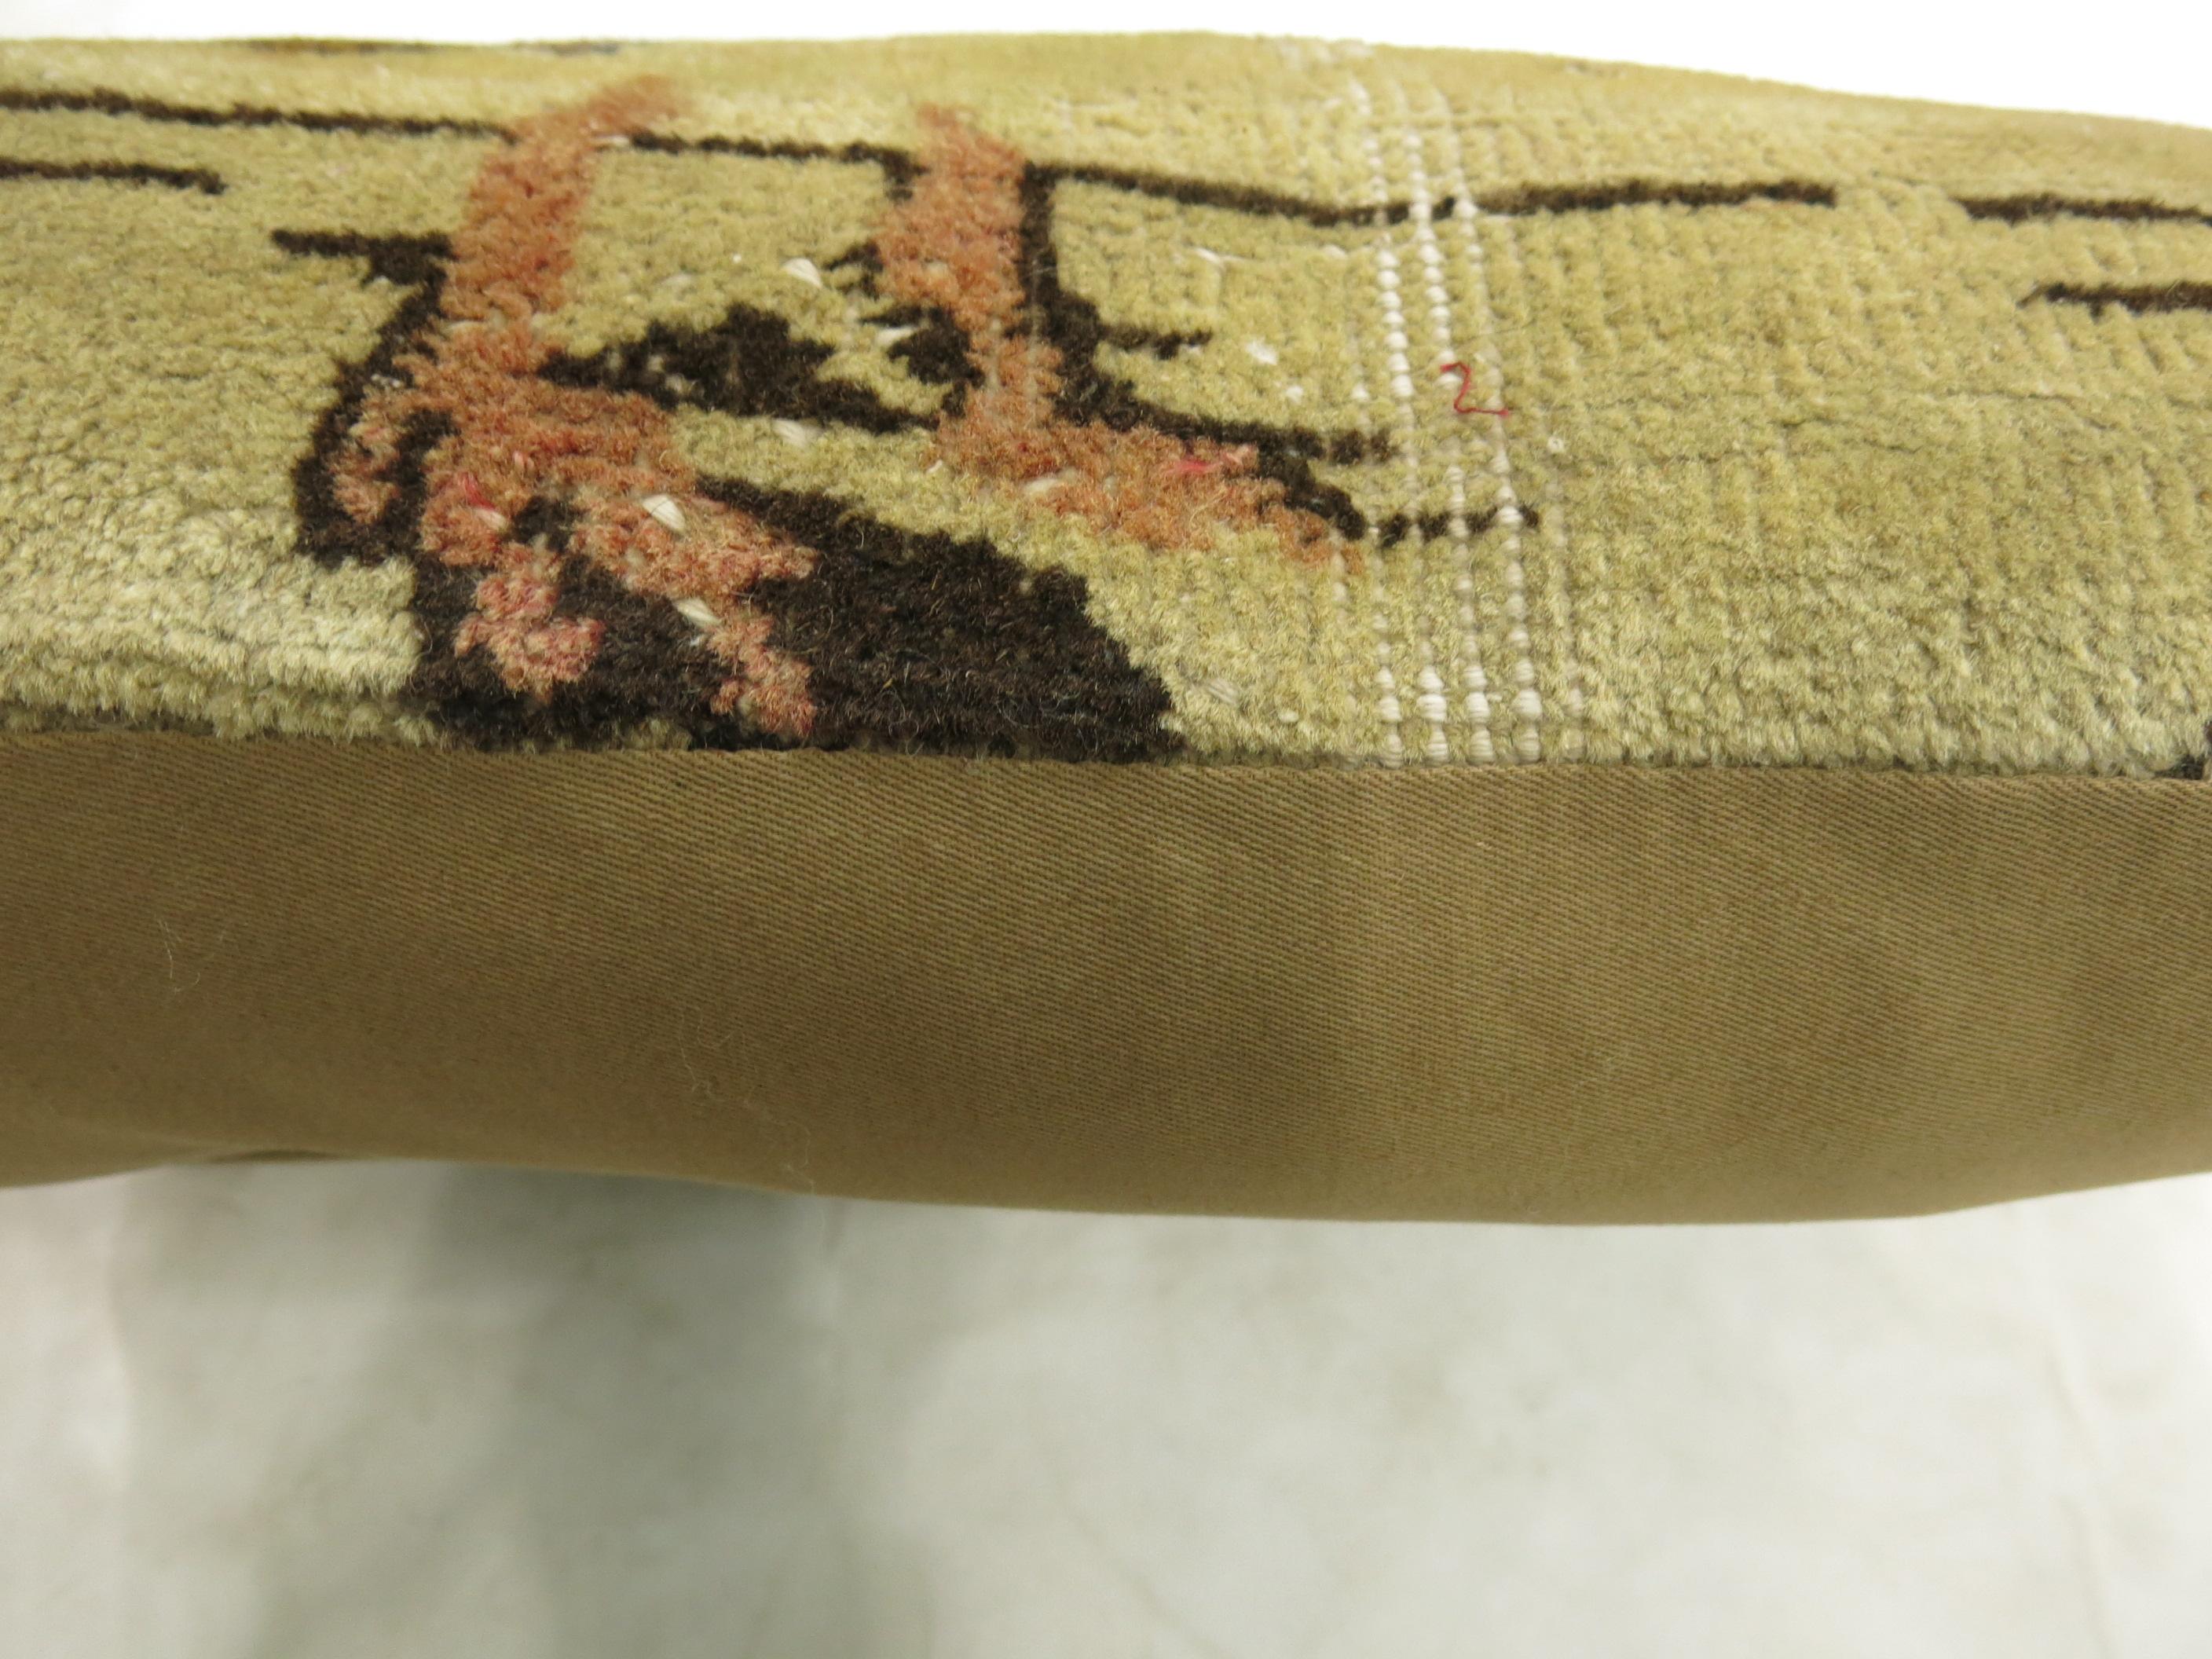 Pillow made from a Turkish rug depicting a colorful rooster. Rose, beige, light green accents on a tan field.

Measures: 1'4